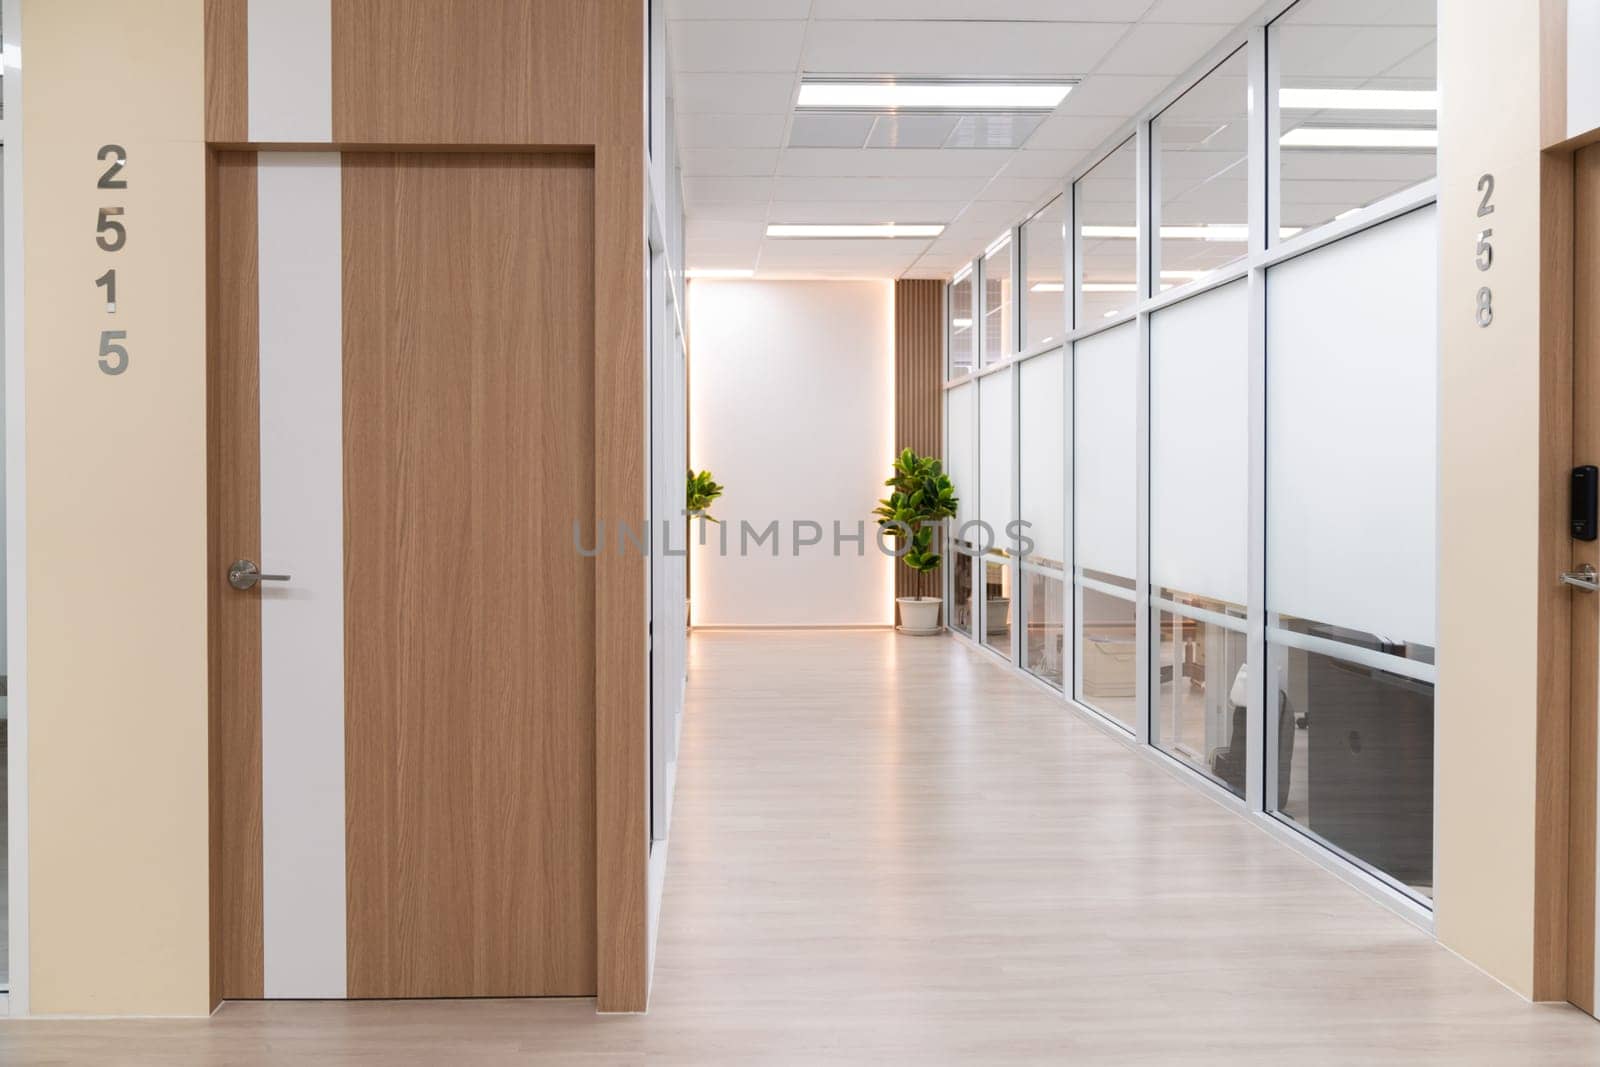 Empty modern office bright corridor with glass wall. Long white modern office hallway. No businesspeople. Many glass wall and doors. White bright empty workplace corridor background. Ornamented.